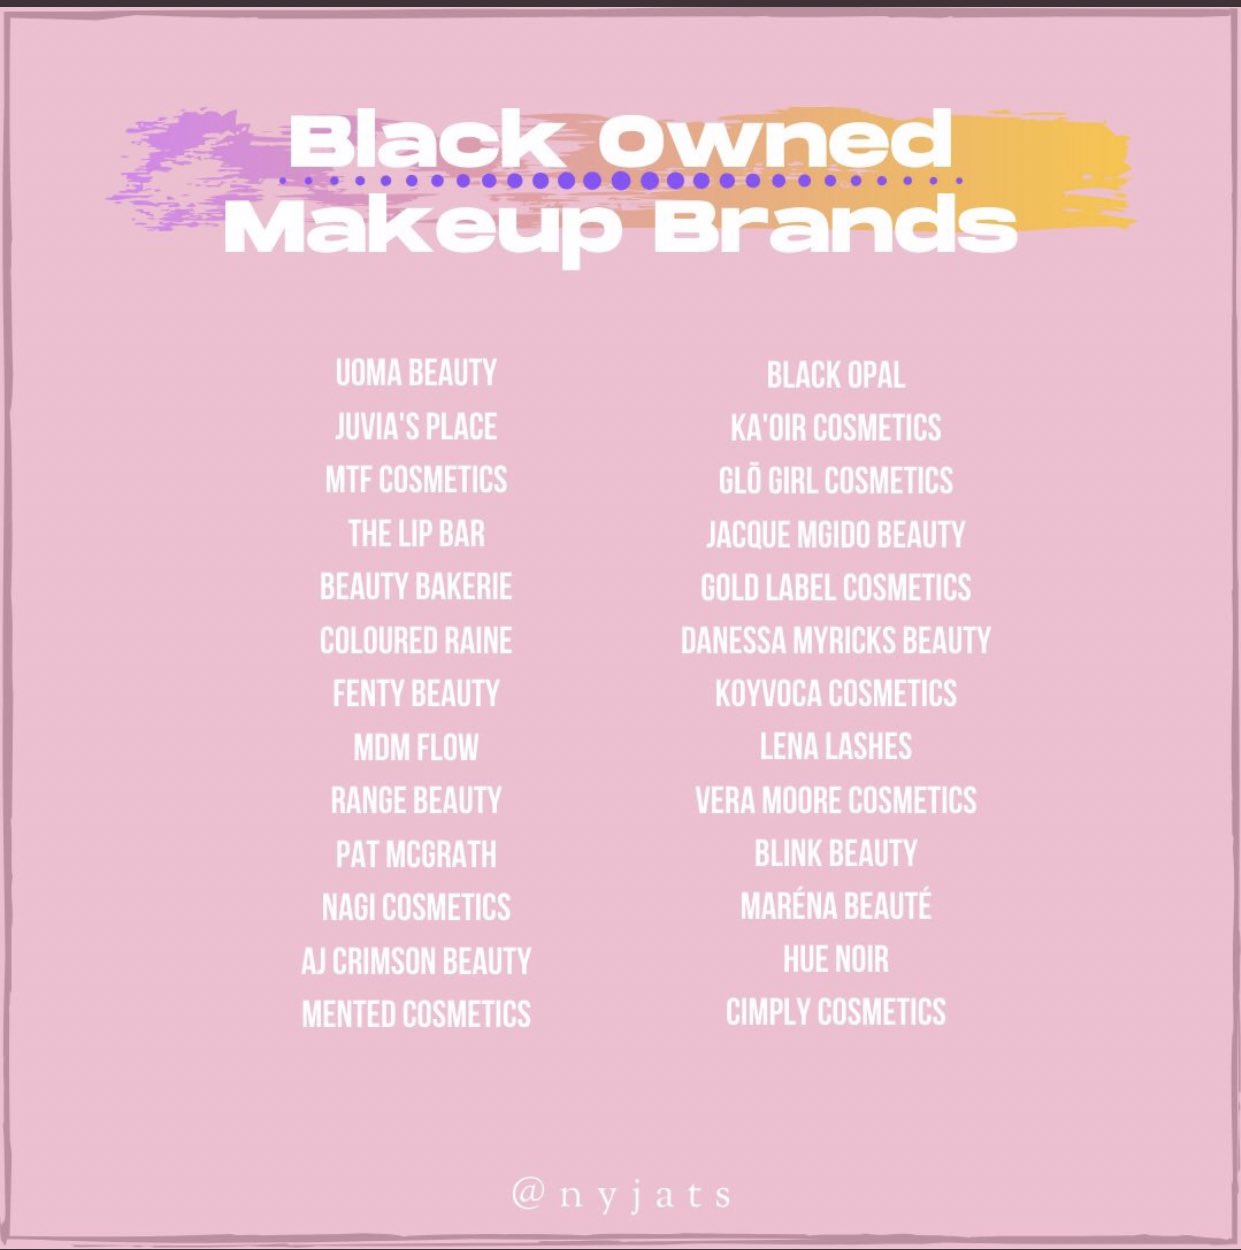 Overhale gøre ondt tragt Trendmood on Twitter: "Please tag some of your favorite black owned makeup  brands below! @nyjats created this amazing list Let's add more!!  https://t.co/xiYLuwipz5" / Twitter